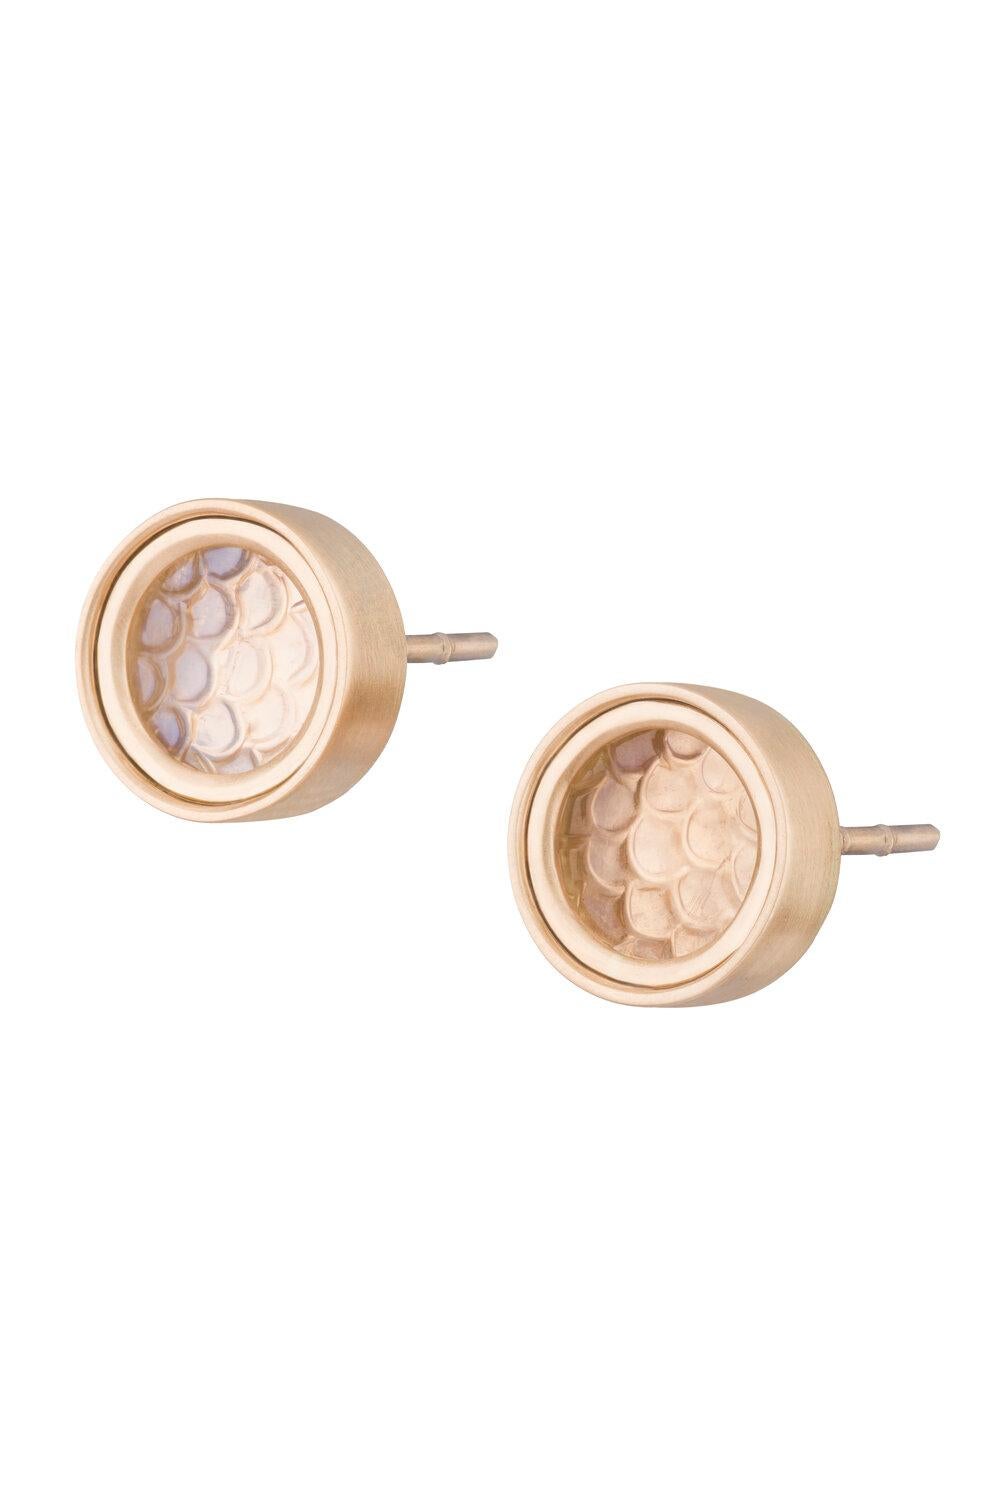 OUROBOROS snakeskin carved rainbow moonstone studs set in an 18kt gold ridged frame setting. Blue and white rainbow moonstone options. 

OUROBOROS’ commitment to using only the most unique stones set in 18 or 24 Karat gold, is matched only to